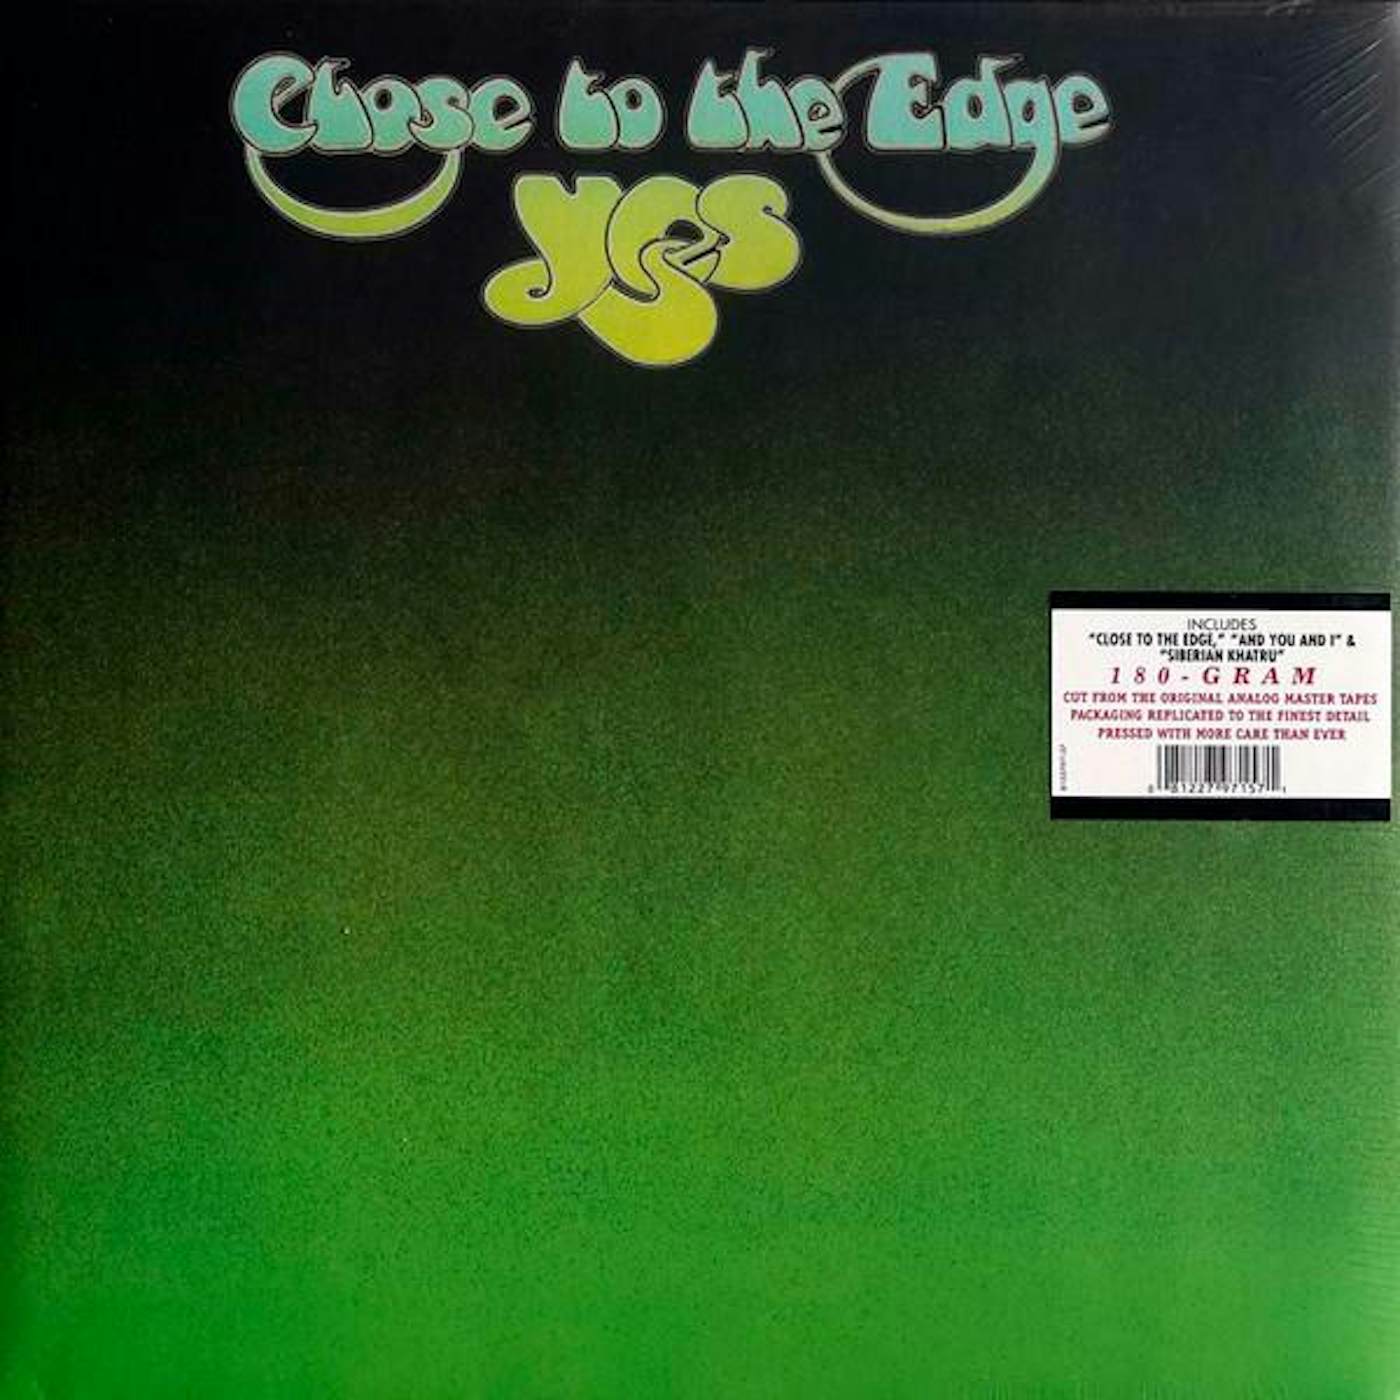 Yes Close to the Edge Vinyl Record